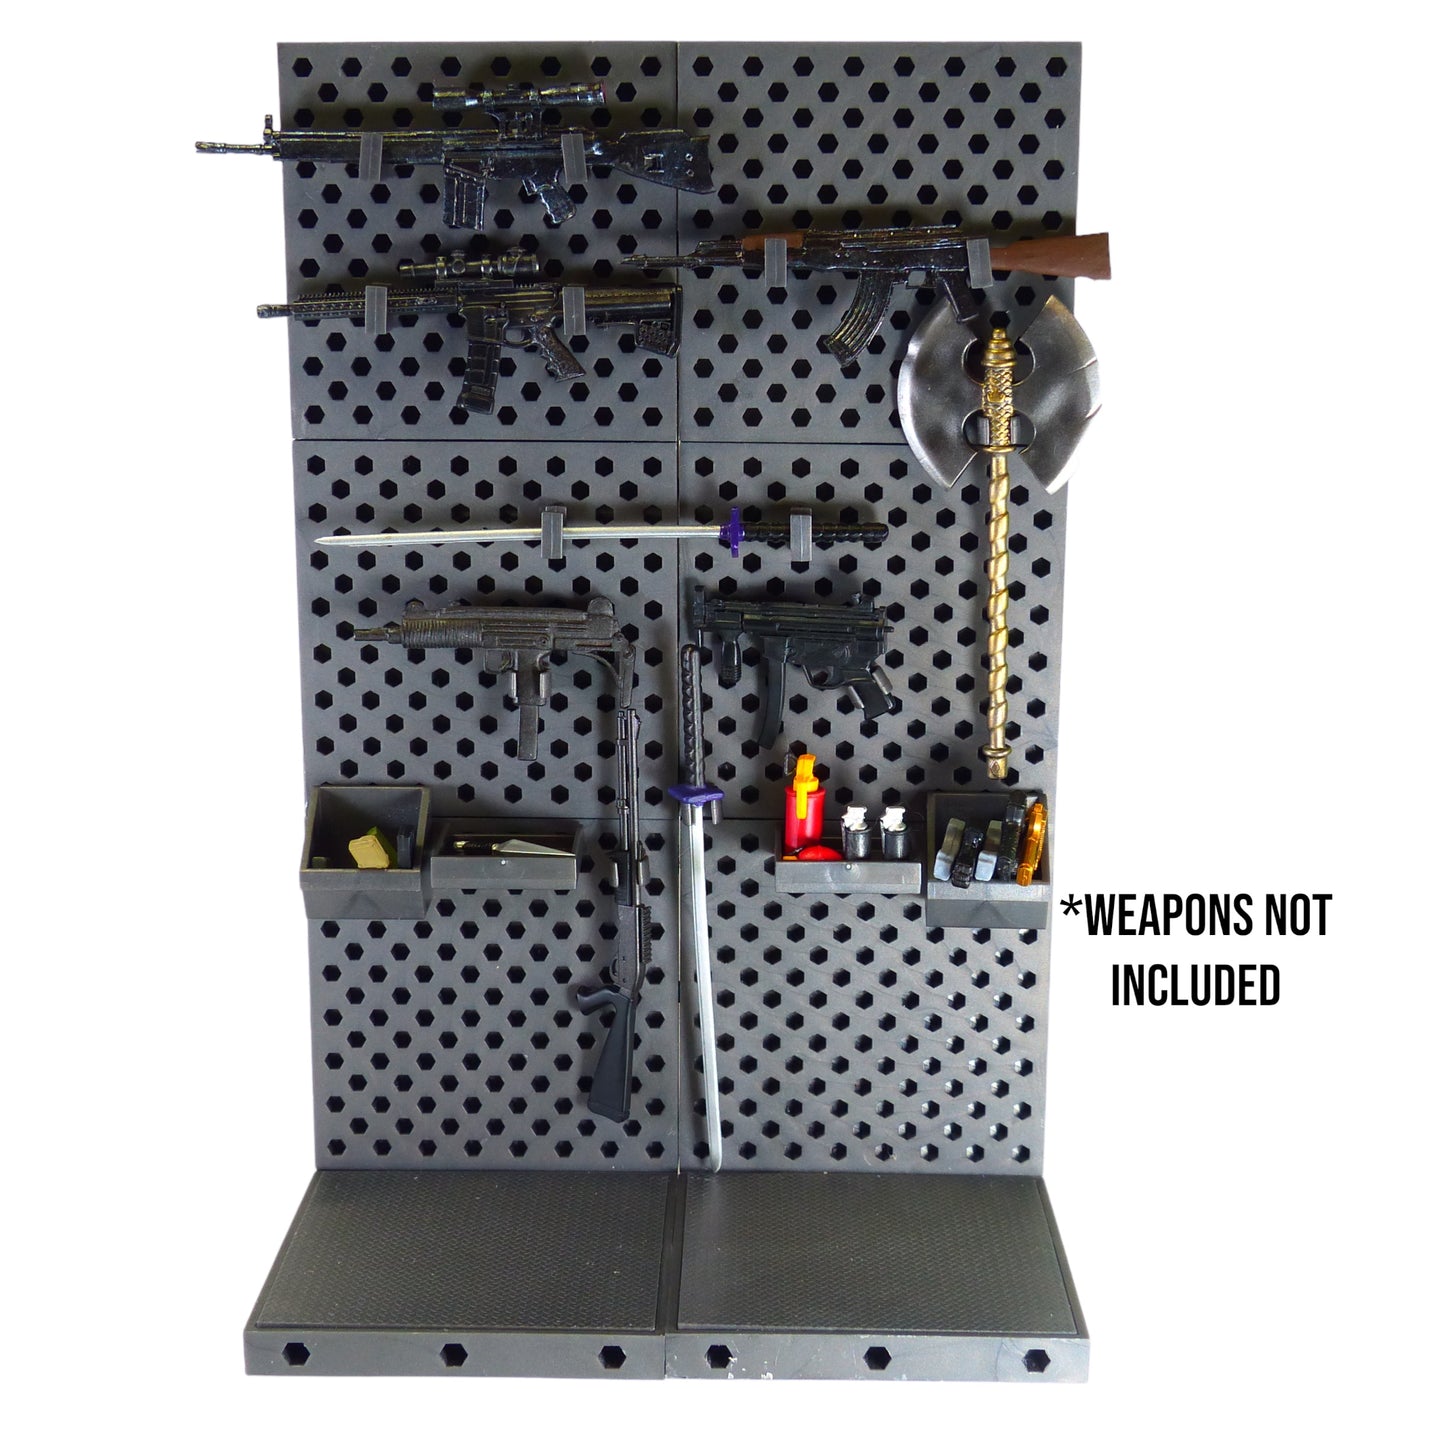 The Ultimate Weapons Rack!